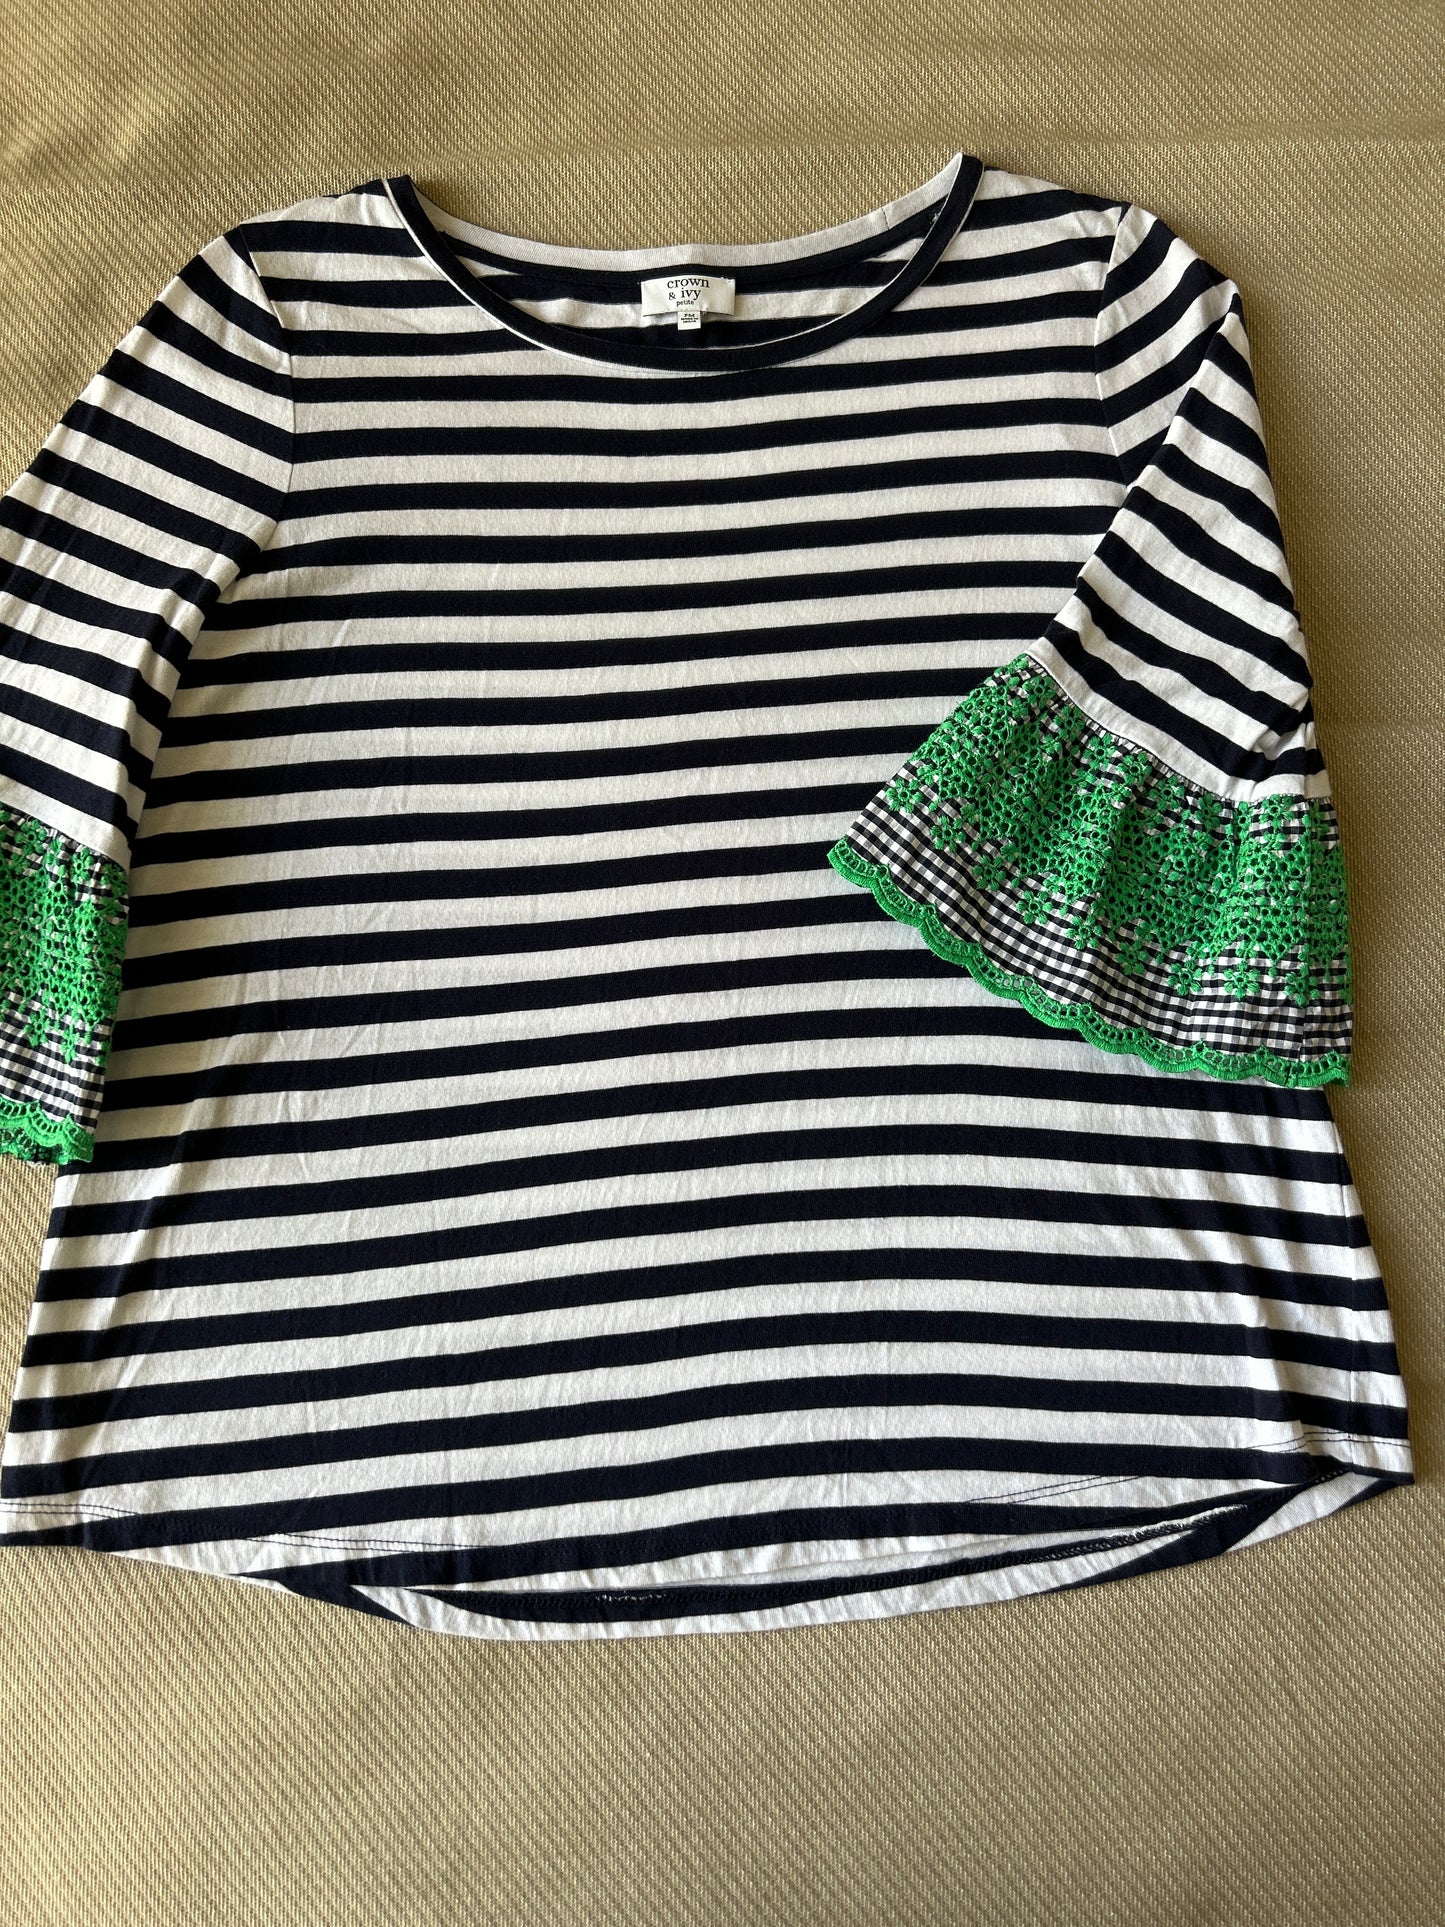 Crown & Ivy/Women’s Top/Size PM